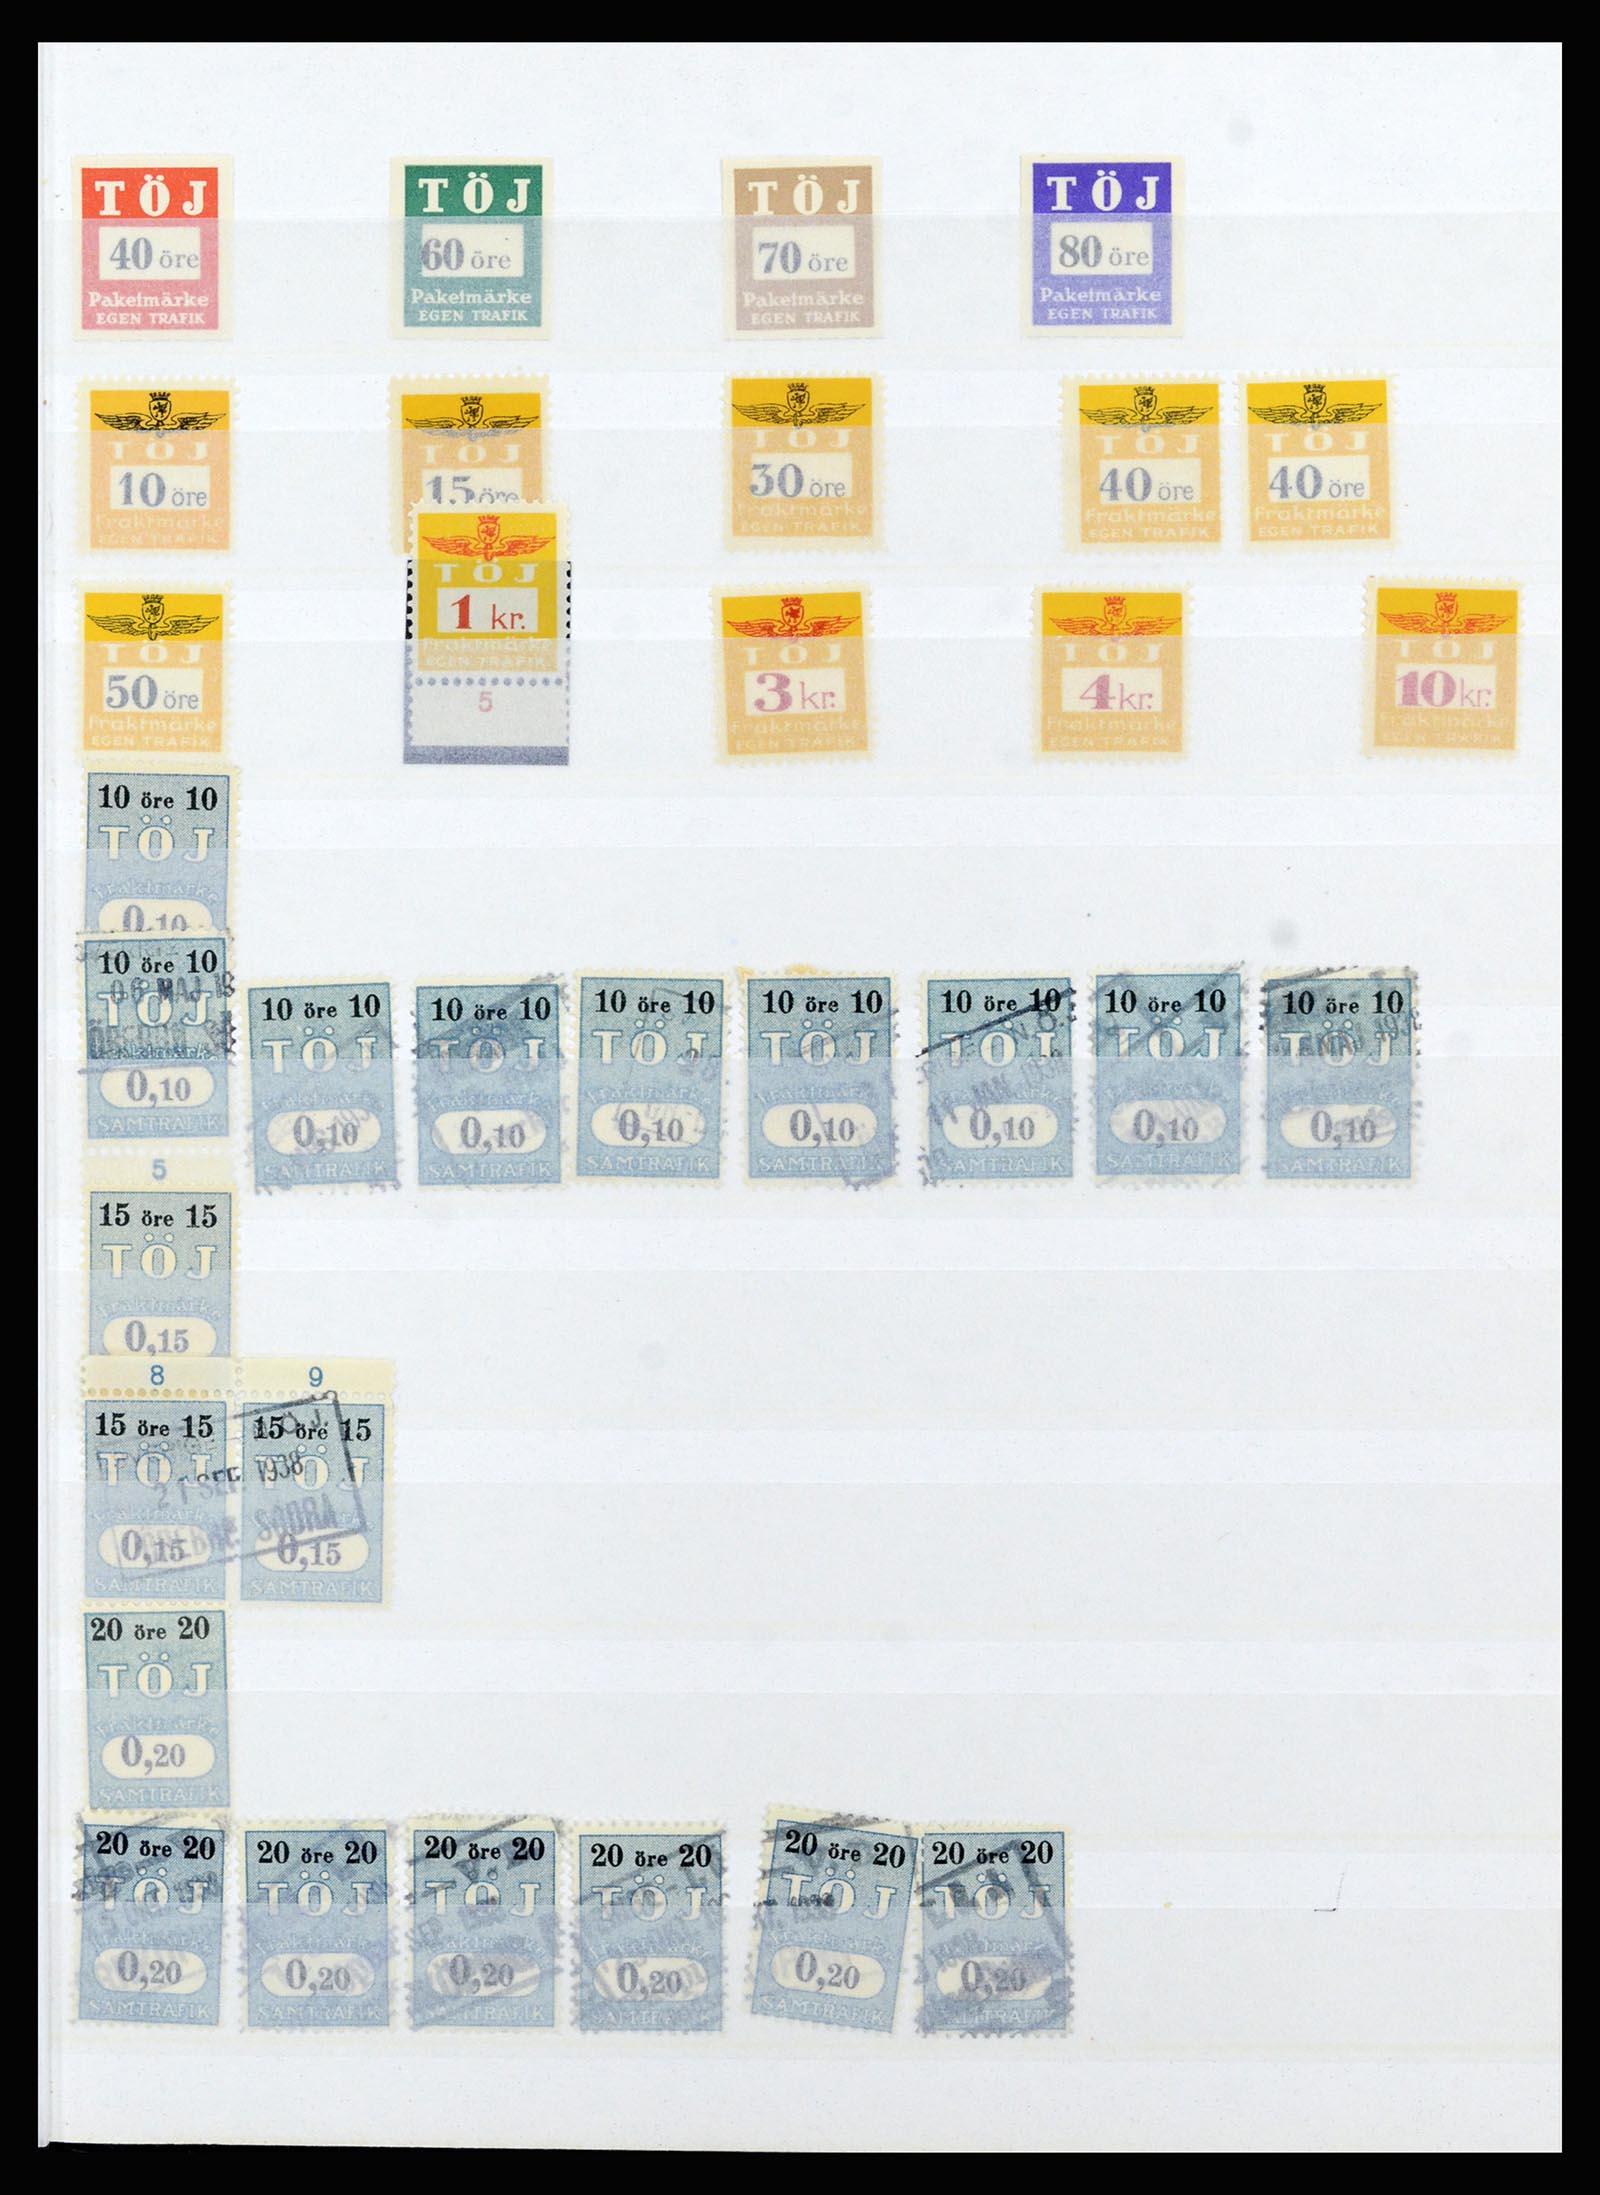 36981 019 - Stamp collection 36981 Scandinavia railroadstamps.